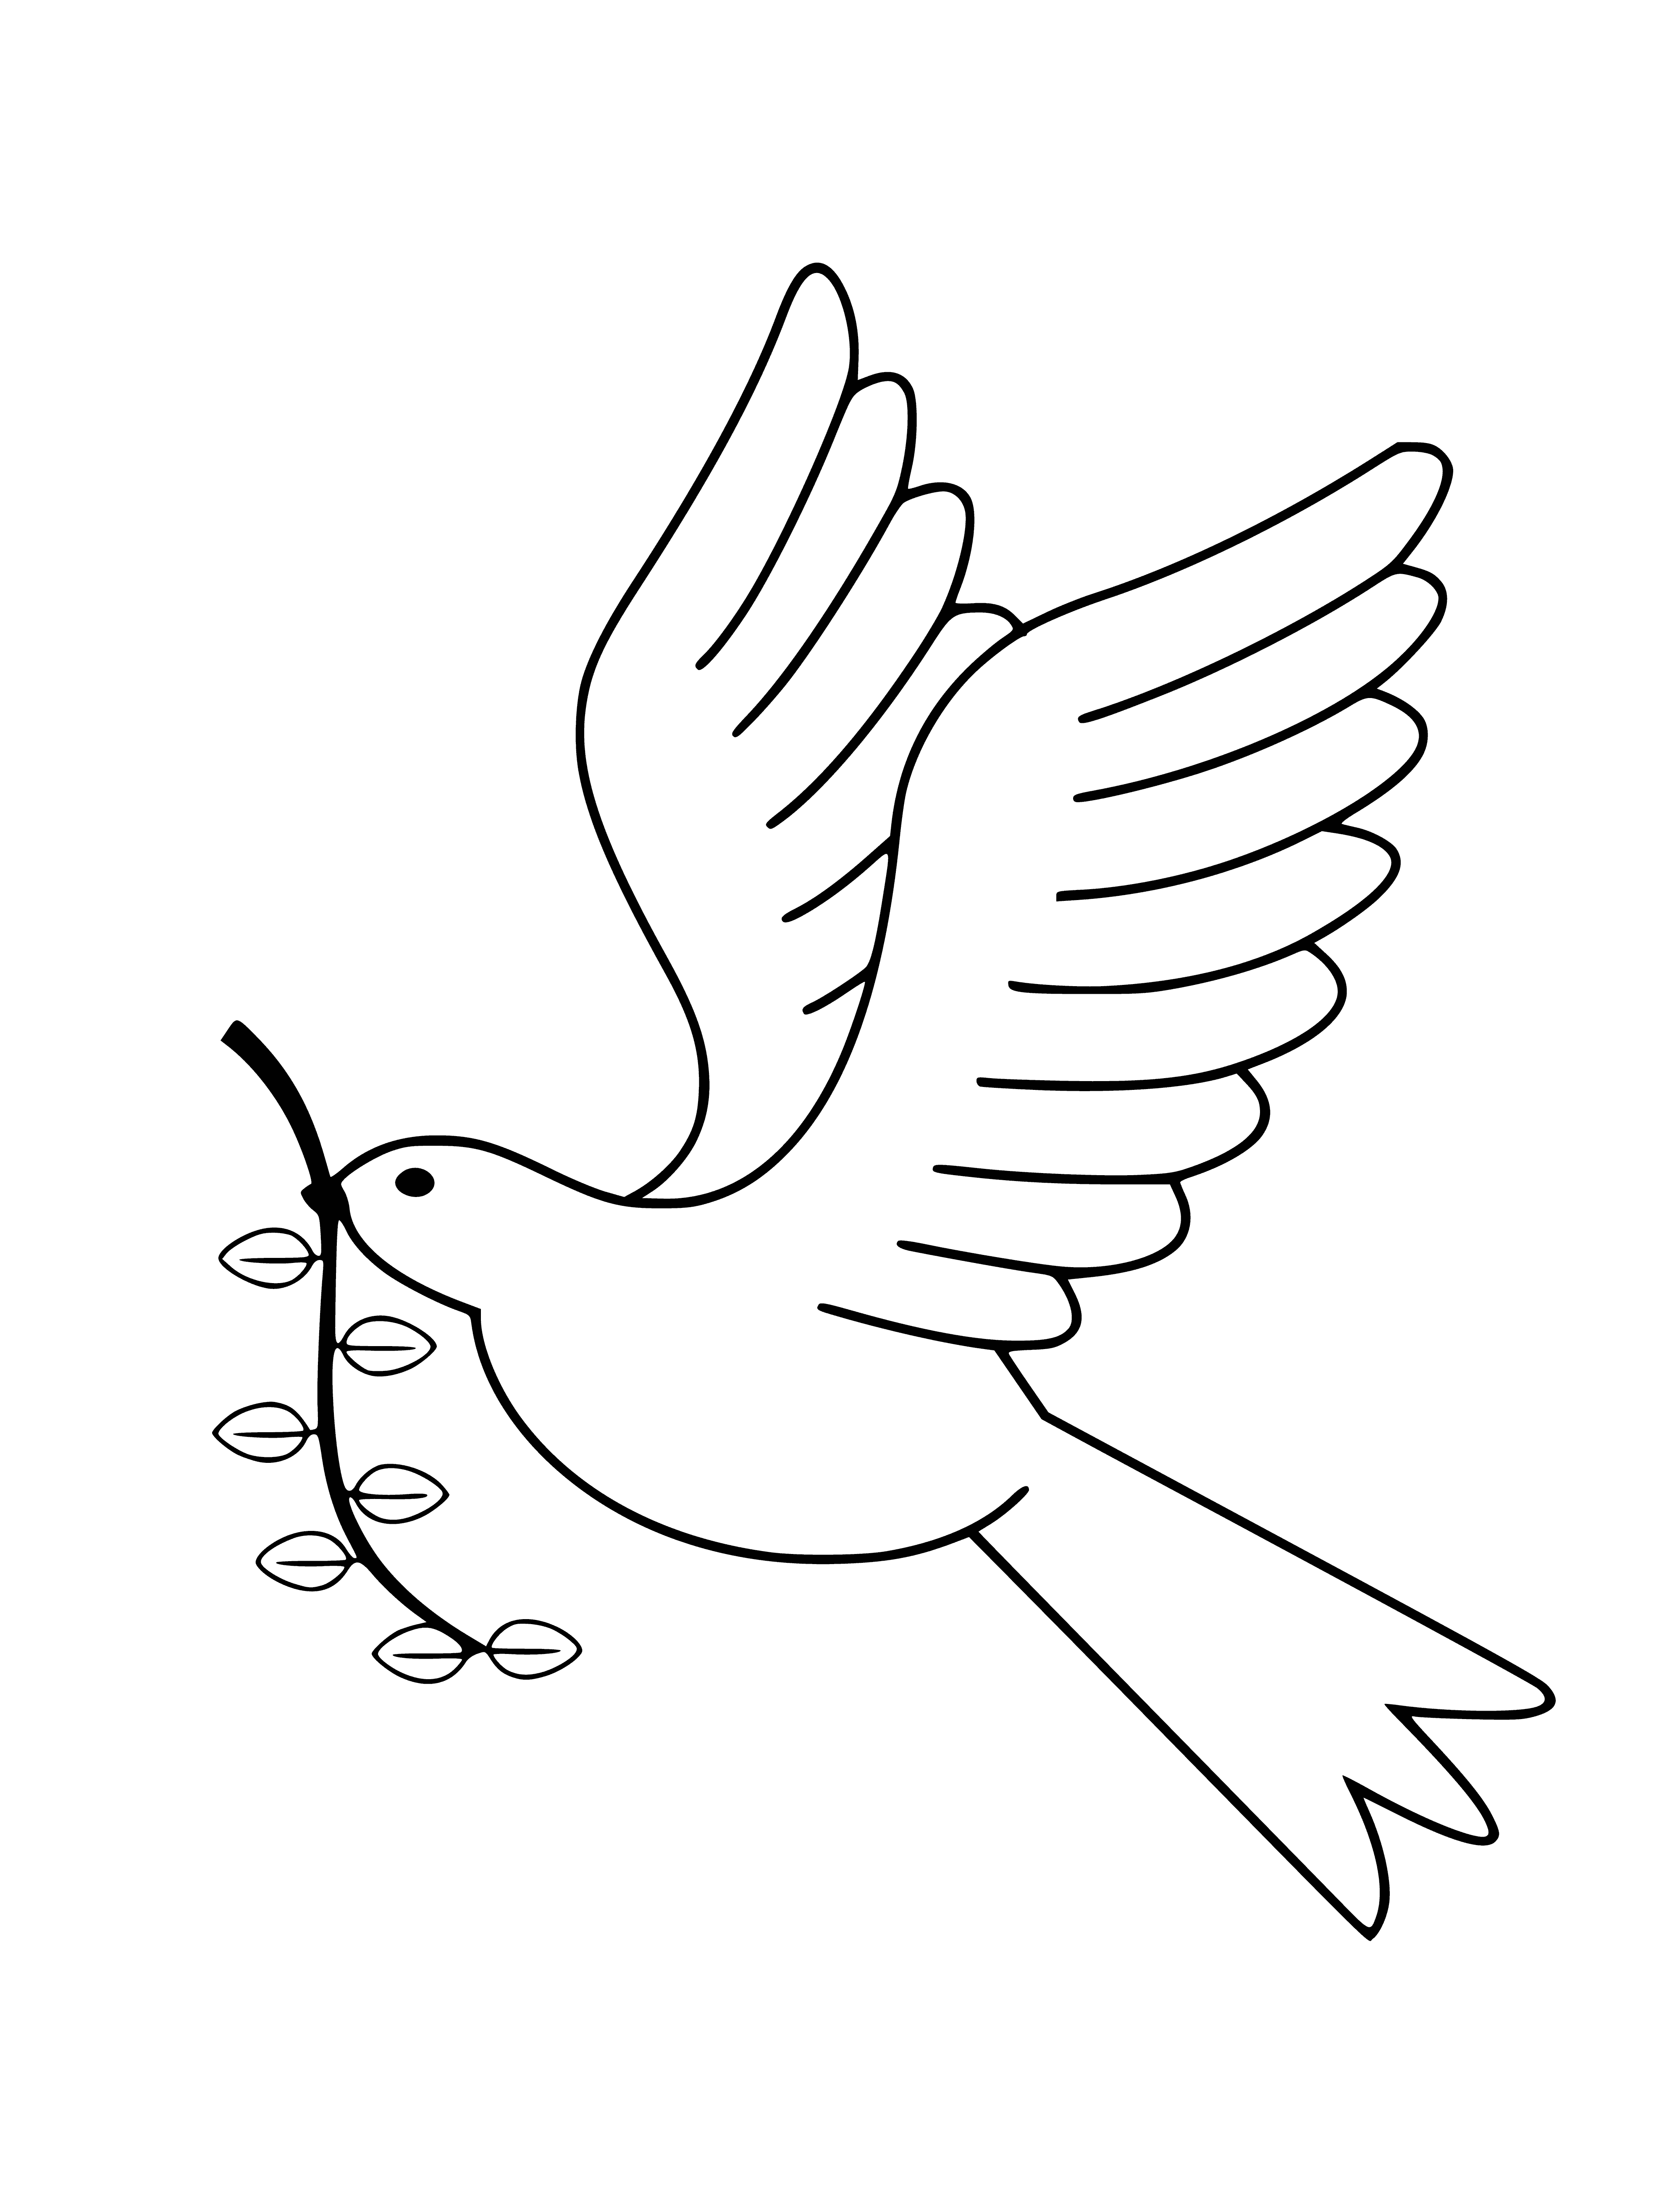 Dove - a symbol of peace coloring page